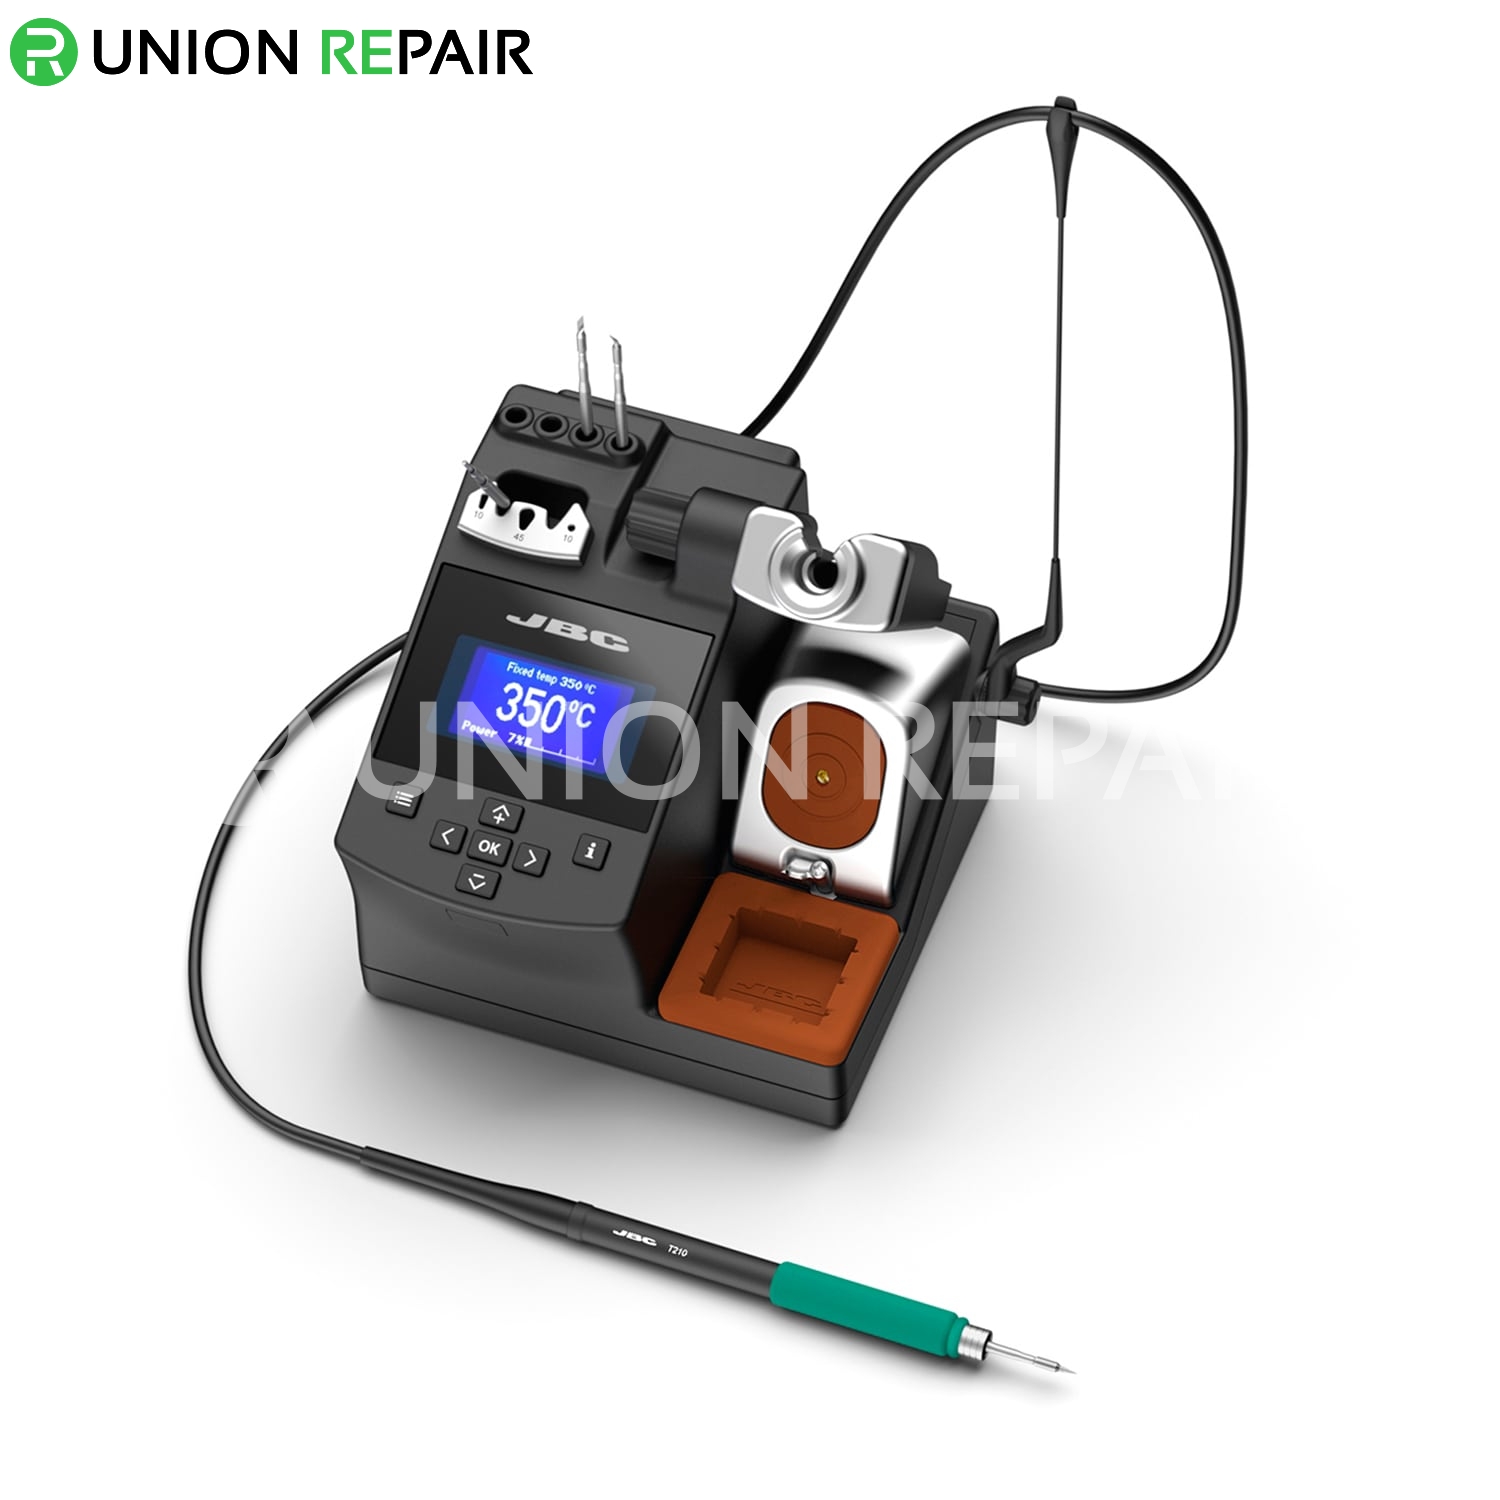 https://images.unionrepair.com/images/watermarked/1/detailed/50/22471-jbc-cd-2shqf-with-t210-a-handle-precision-soldering-station-1.jpg?t=1701254770